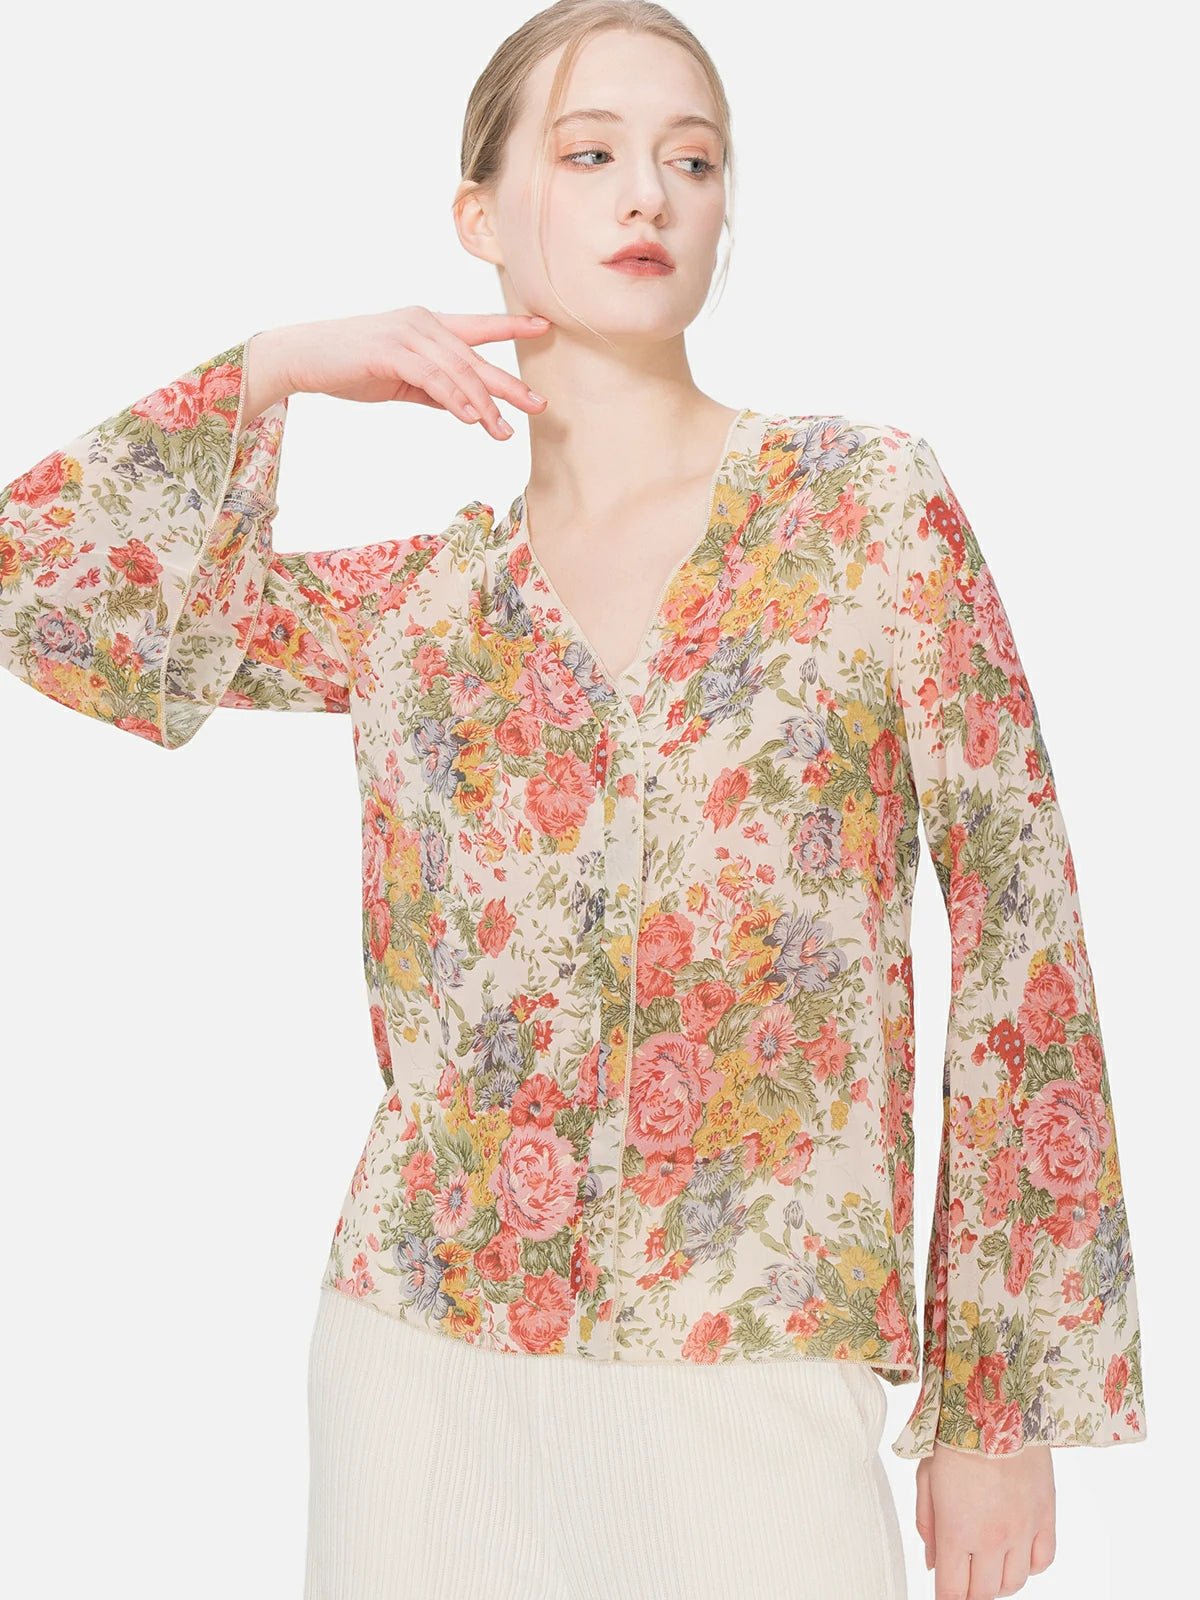 Bohemian floral-print blouse with an ethereal feel, V-neck design, and lightweight texture, providing a comfortable and free-spirited fashion choice for casual and special occasions.